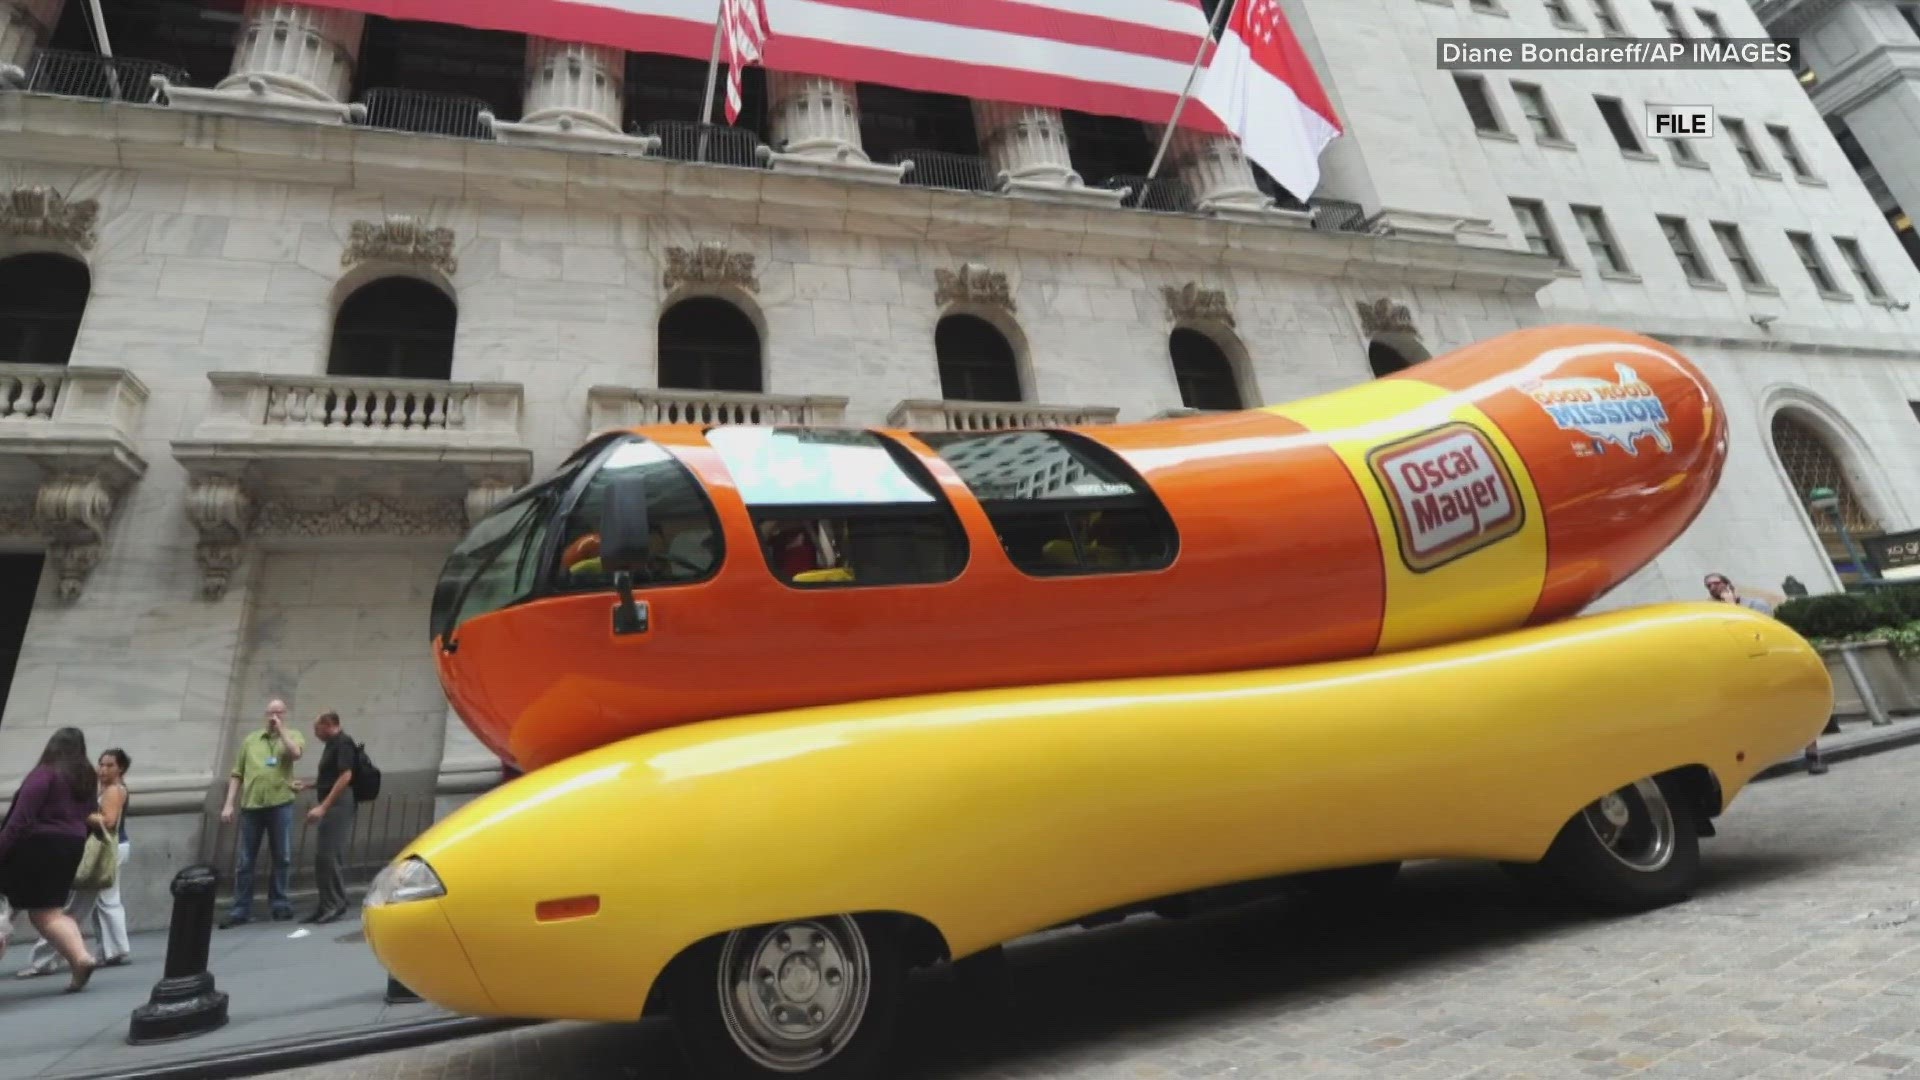 Oscar Mayer mustard the courage to change its name to pay tribute to its brand.